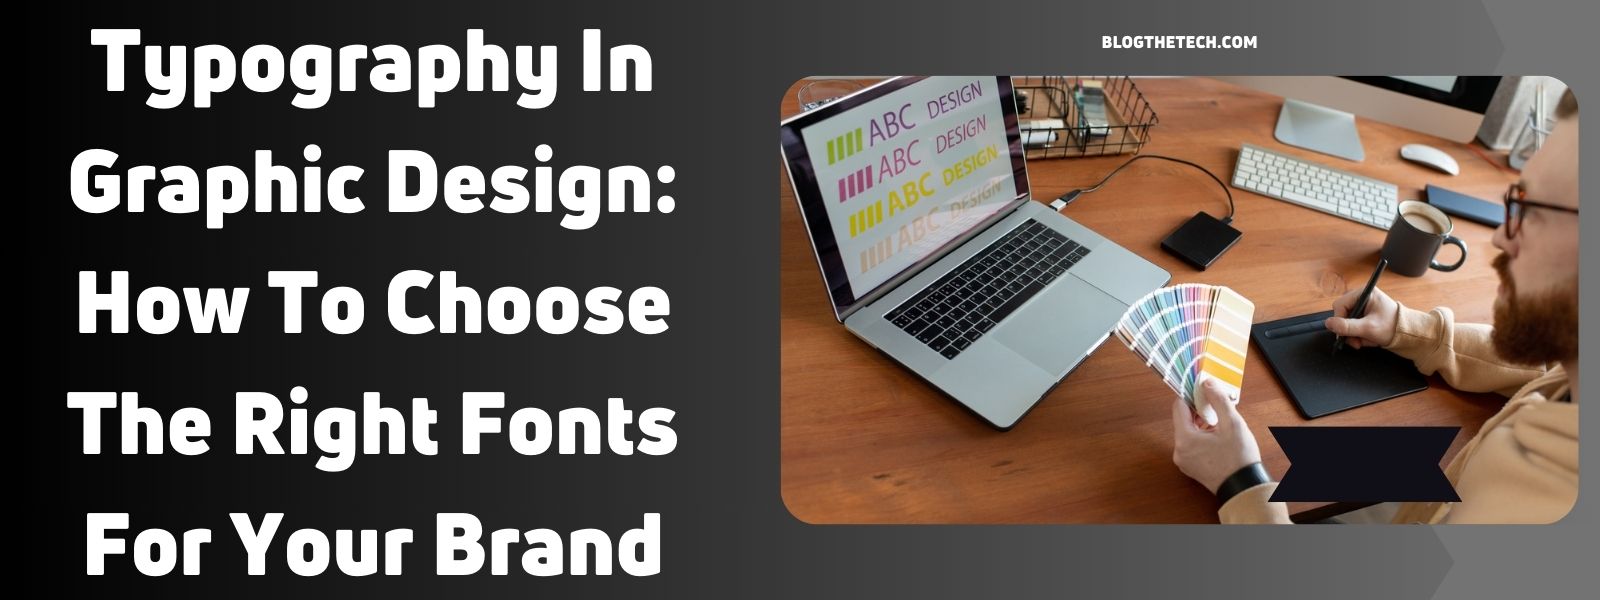 Typography In Graphic Design: How To Choose The Right Fonts For Your Brand